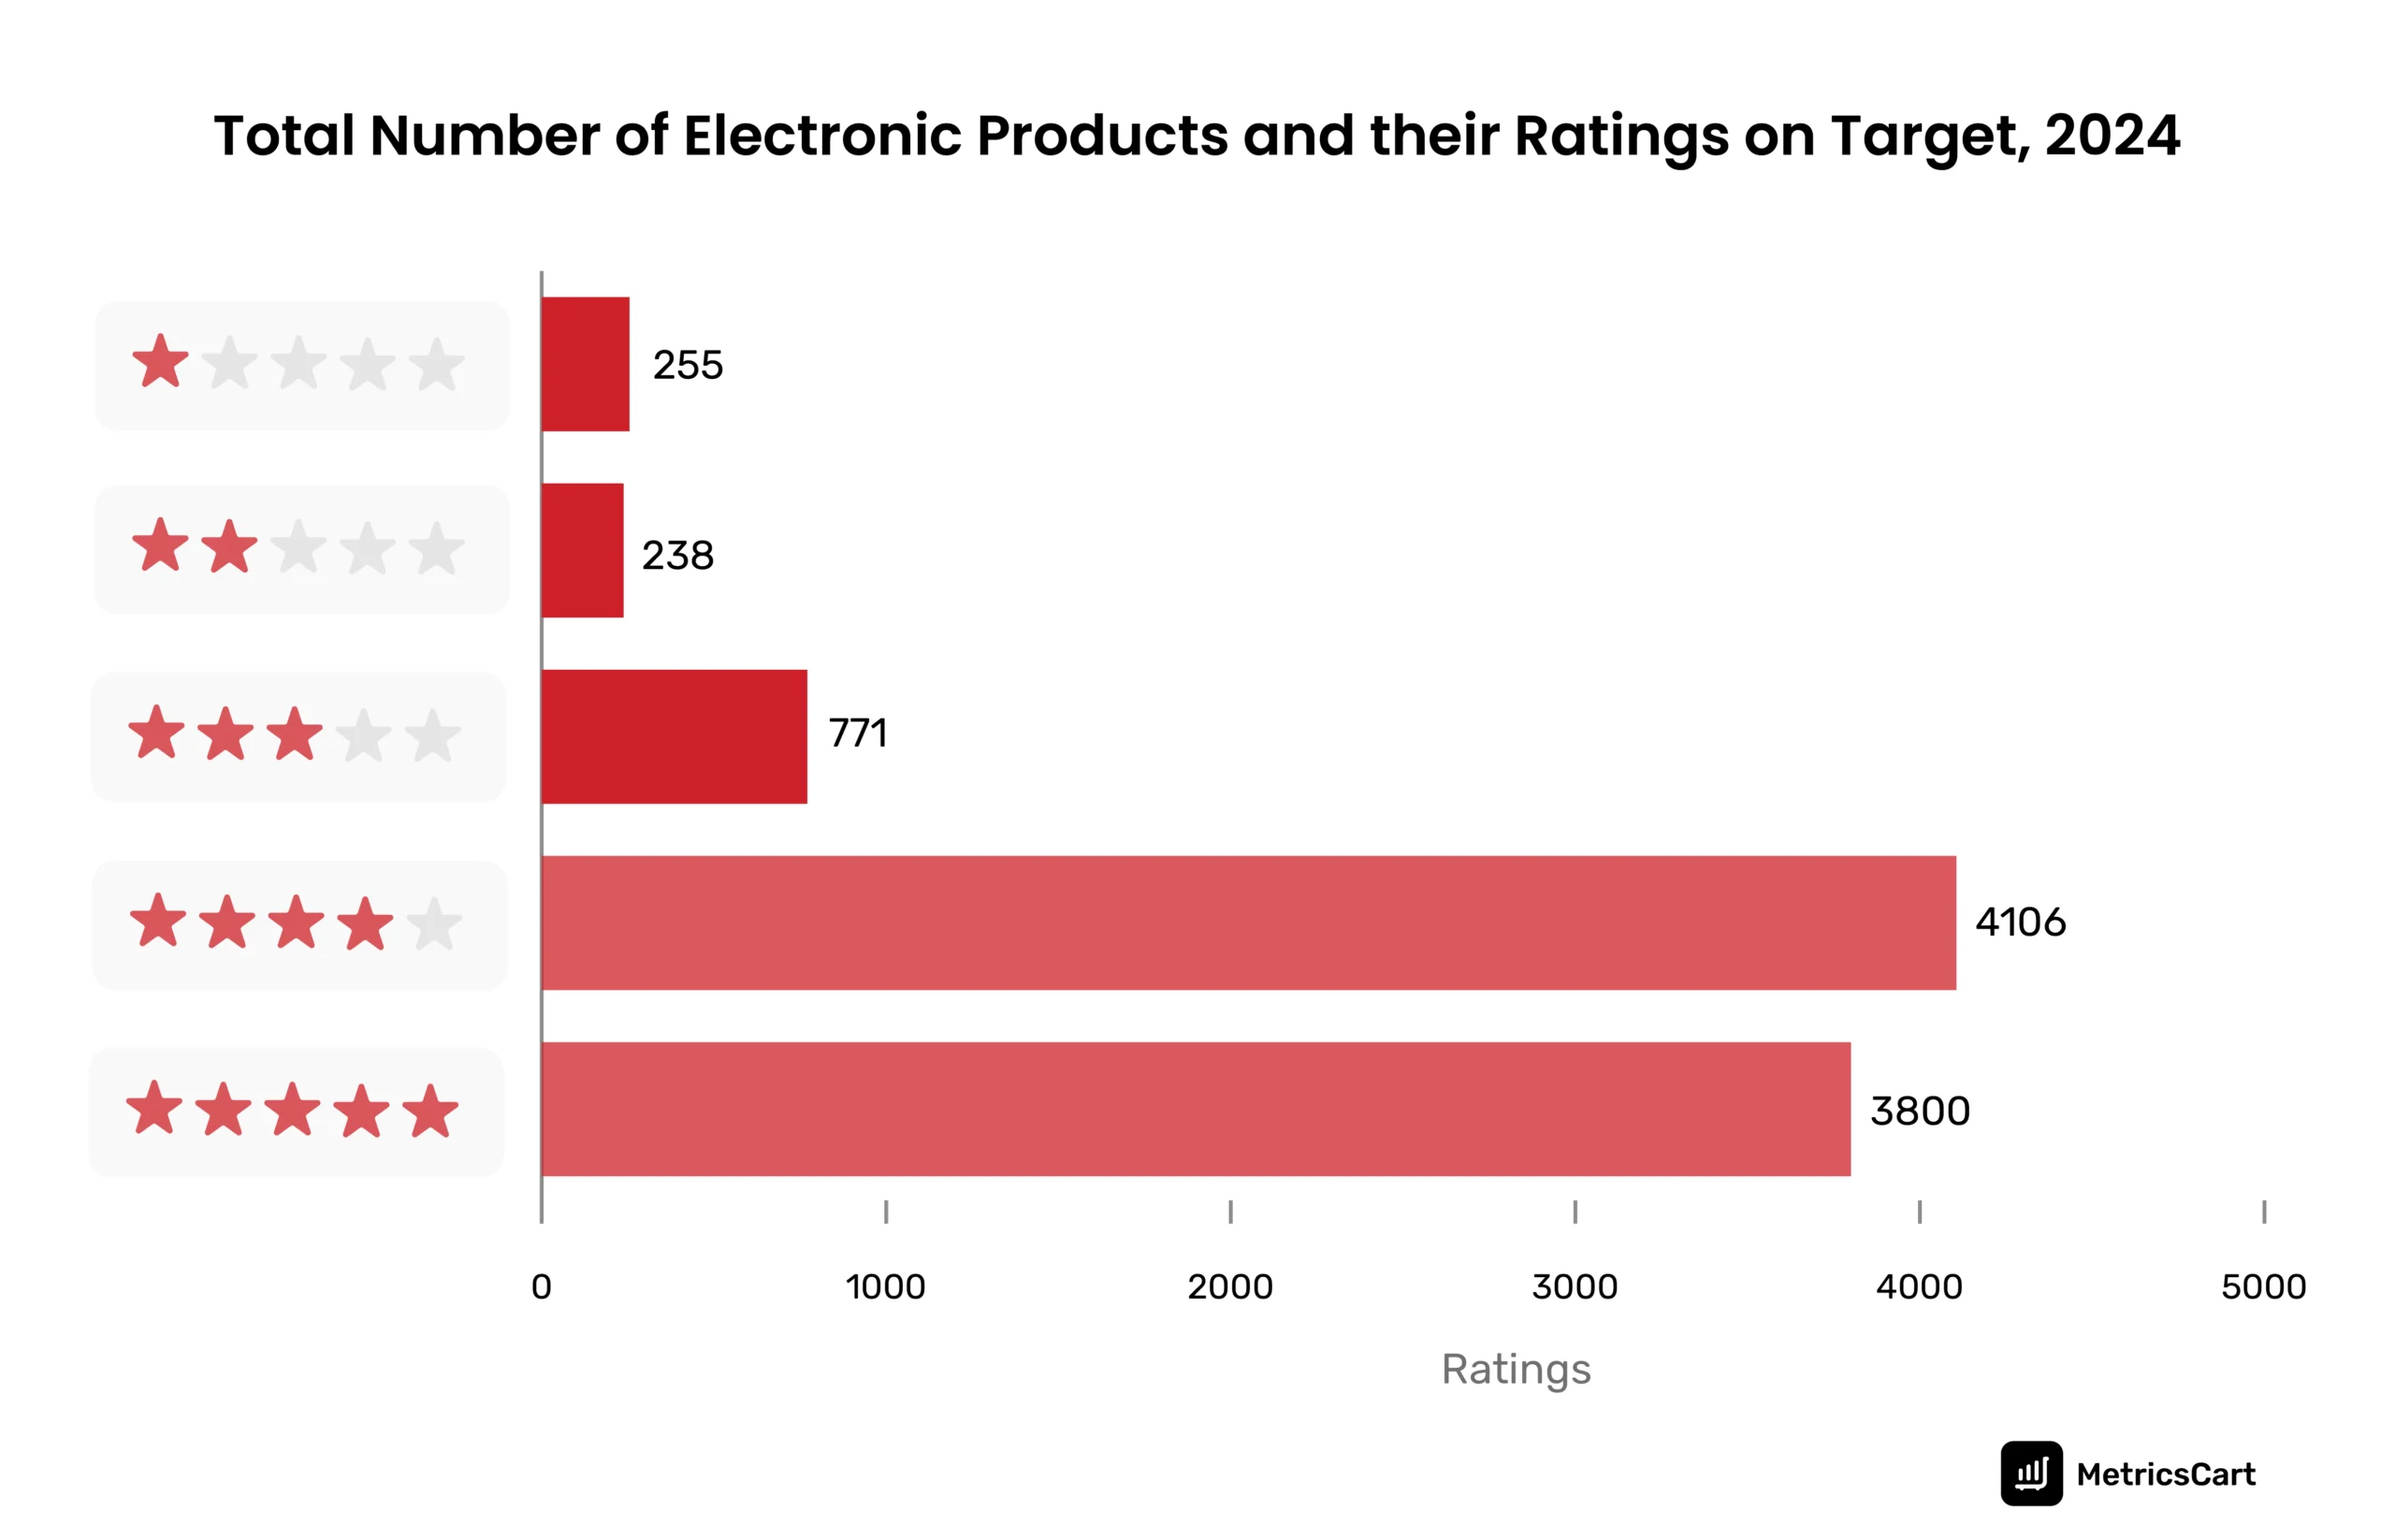 The graph shows the number of products according to the ratings Target sellers received in 2024